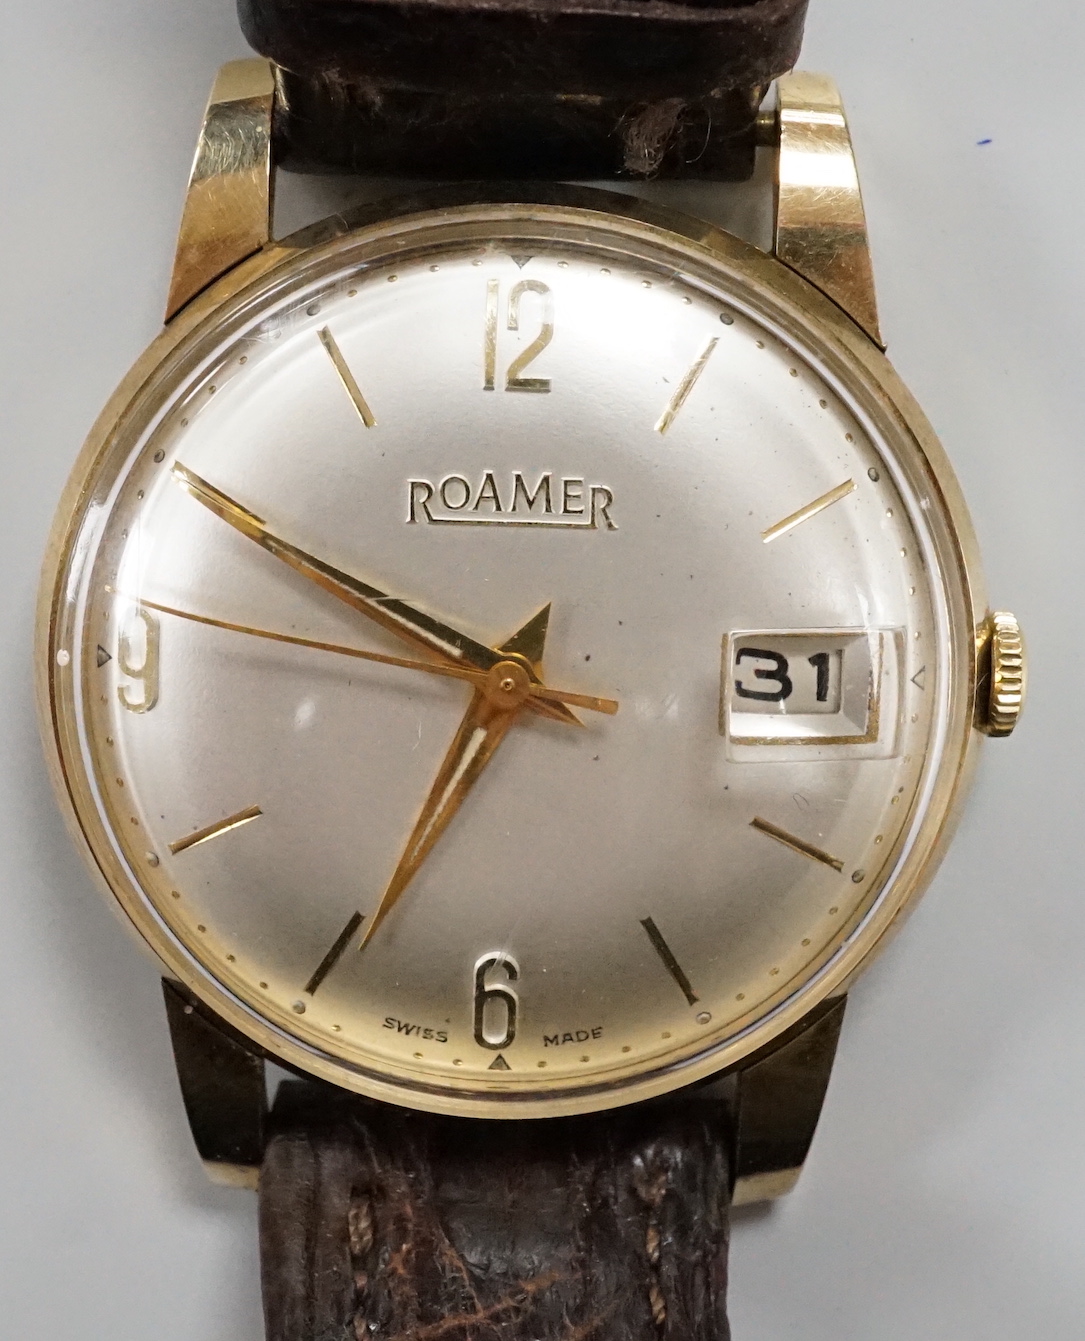 A gentleman's yellow metal Roamer manual wing wrist watch, with case back inscription, on a leather strap.